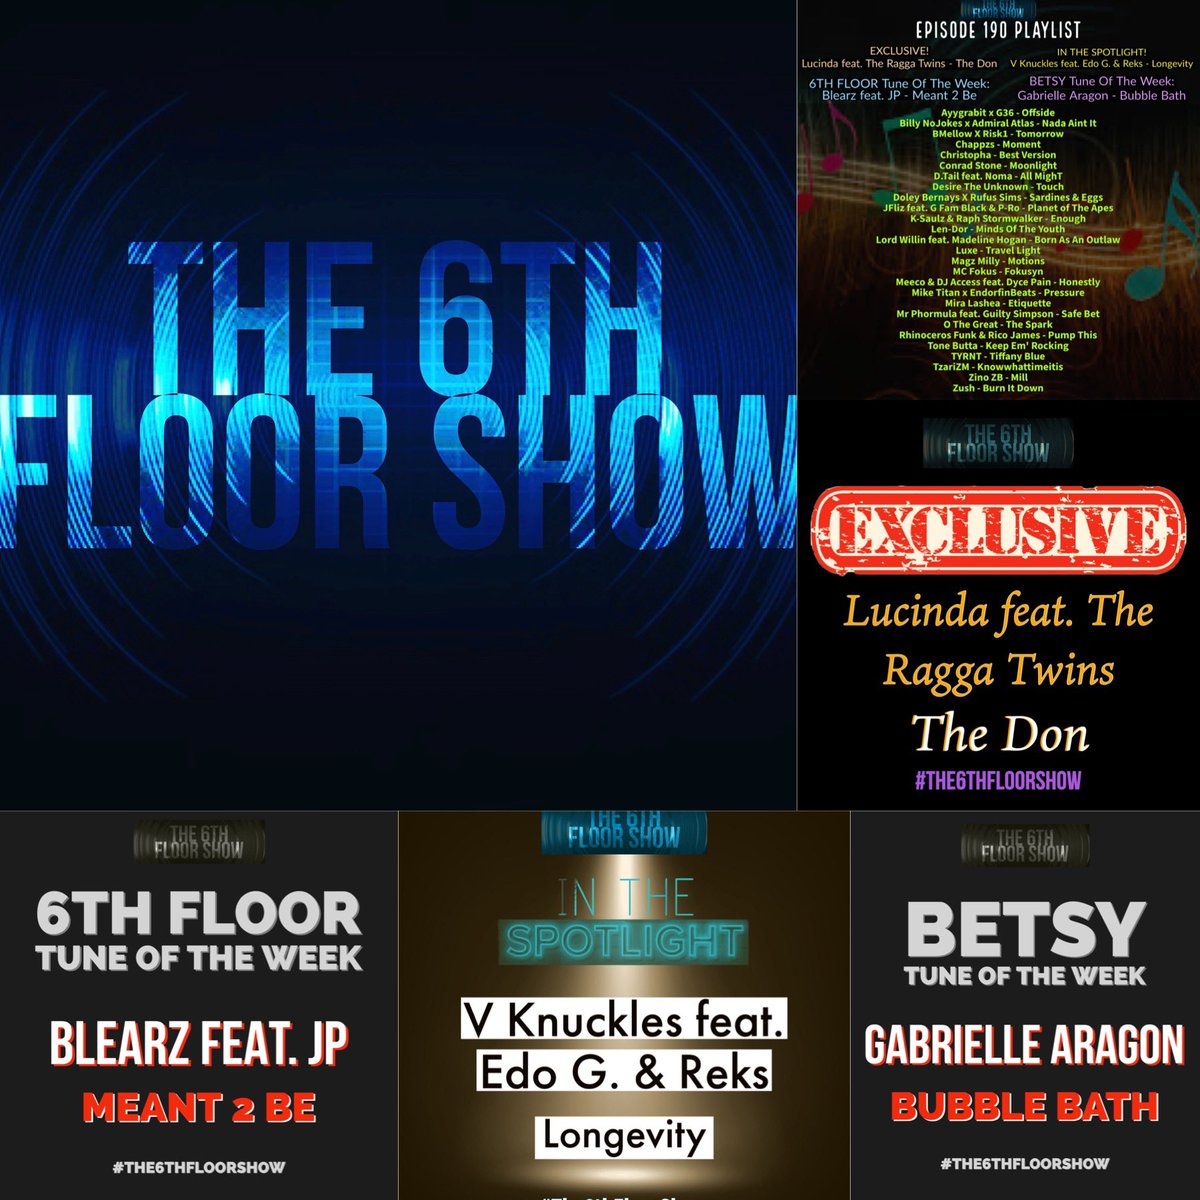 Episode 190 #OutNow featuring  #Exclusive from @DJLusinda  #InTheSpotlight from @KnucklesNBS & 2 #TuneOfTheWeek picks from Blearz & Gabrielle Aragon #The6thFloorShow 

podcasts.apple.com/gb/podcast/the…

music.amazon.co.uk/podcasts/cde4a…

mediafire.com/file/hxu0cj0c0…

rss.com/podcasts/the6t…